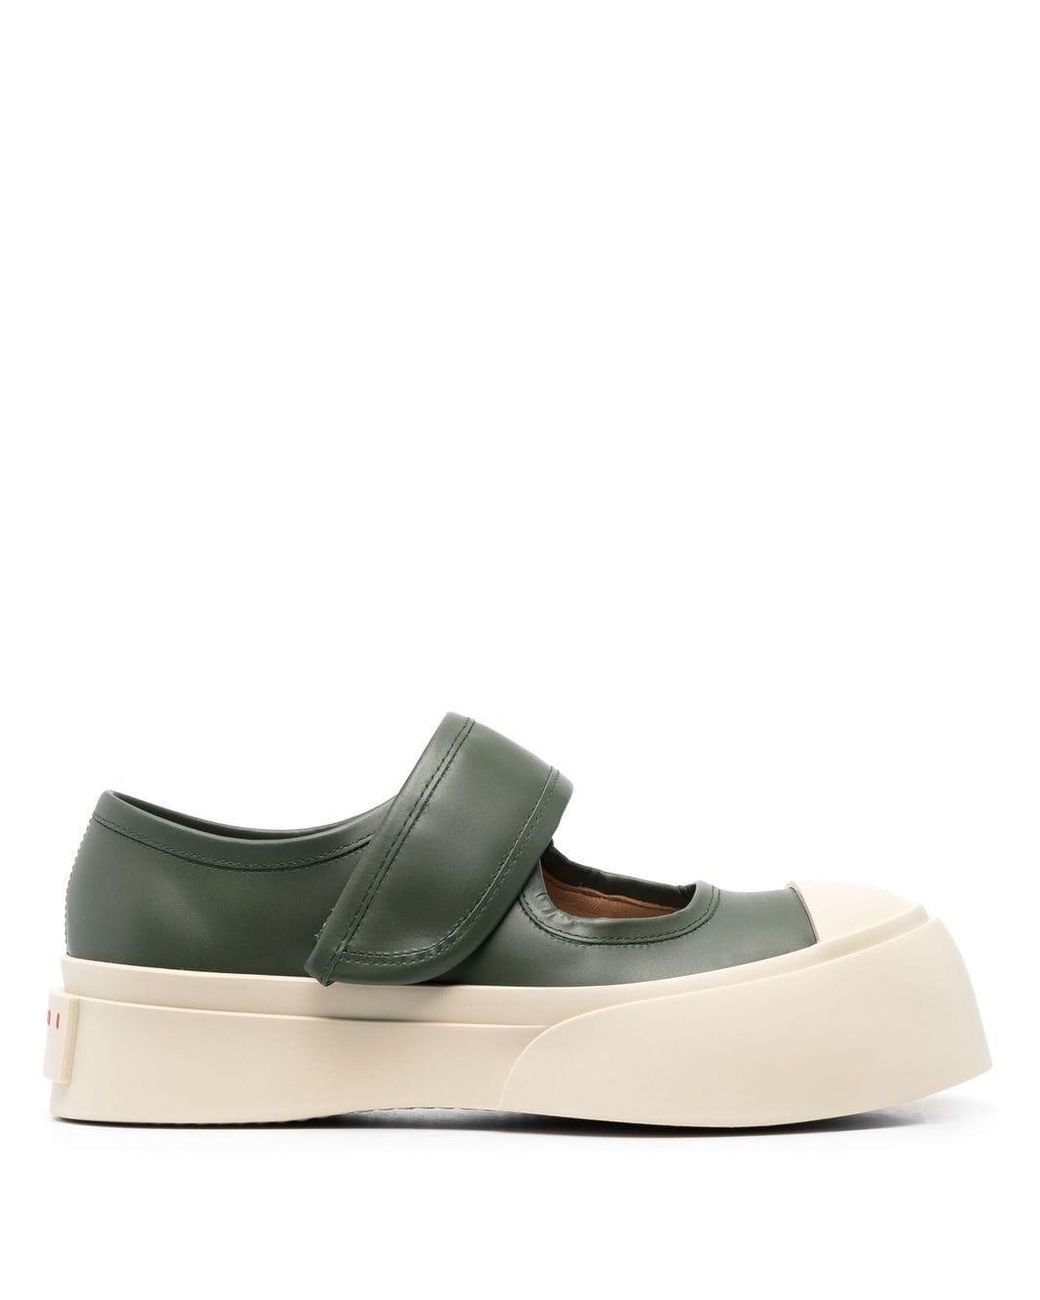 Marni Pablo Mary Jane Sneakers in Green | Lyst